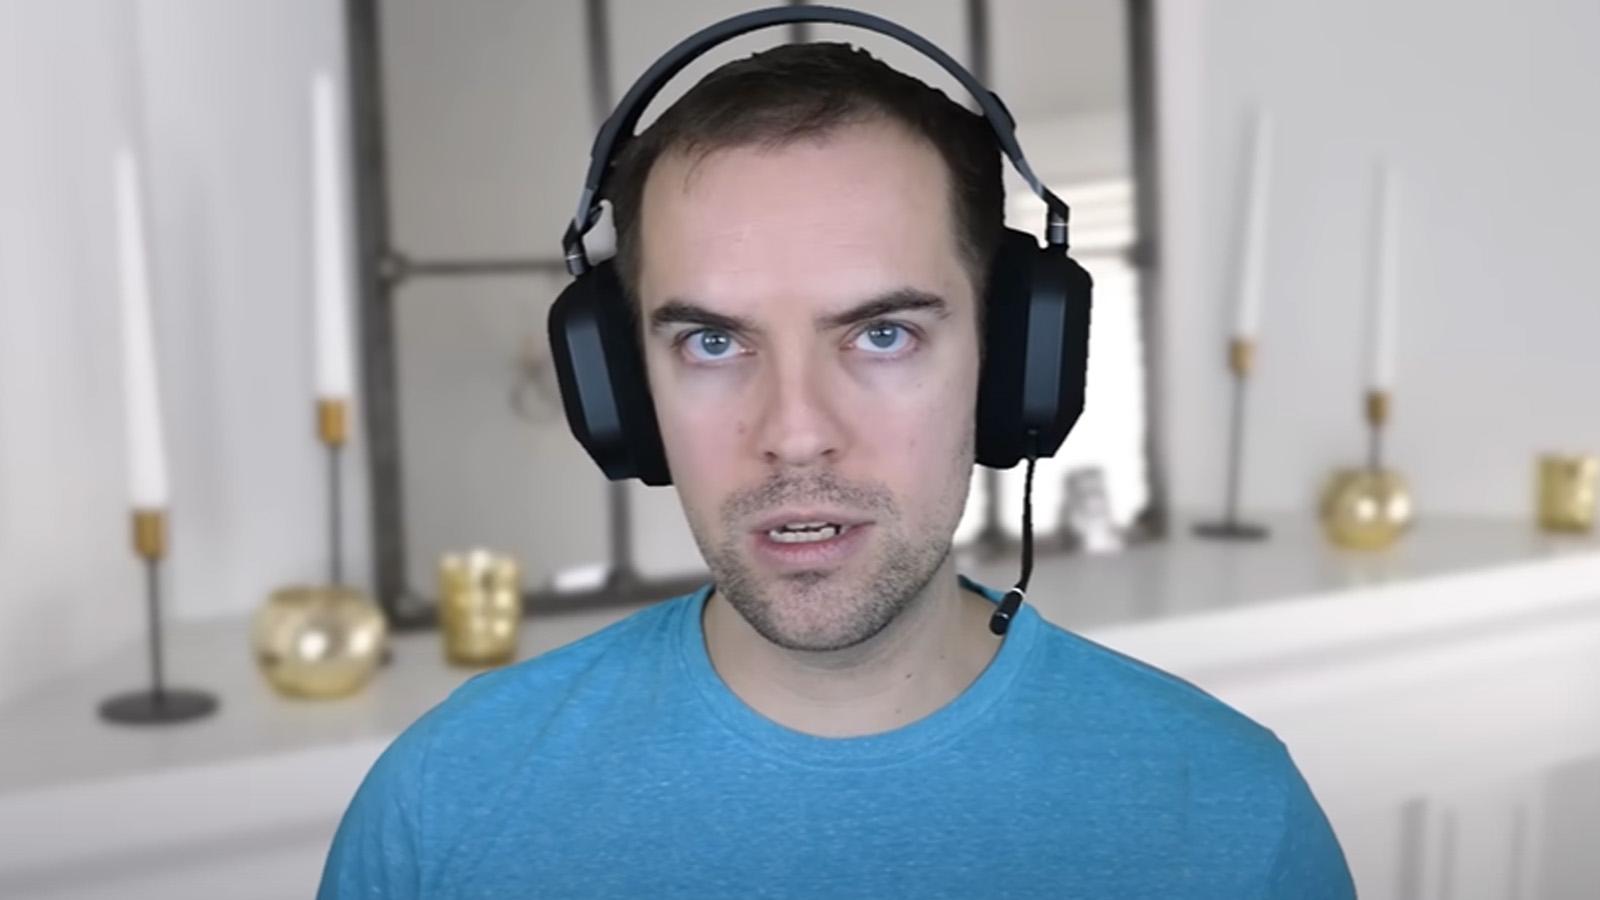 JacksFilms reveals what comes next following SSSniperWolf doxxing scandal